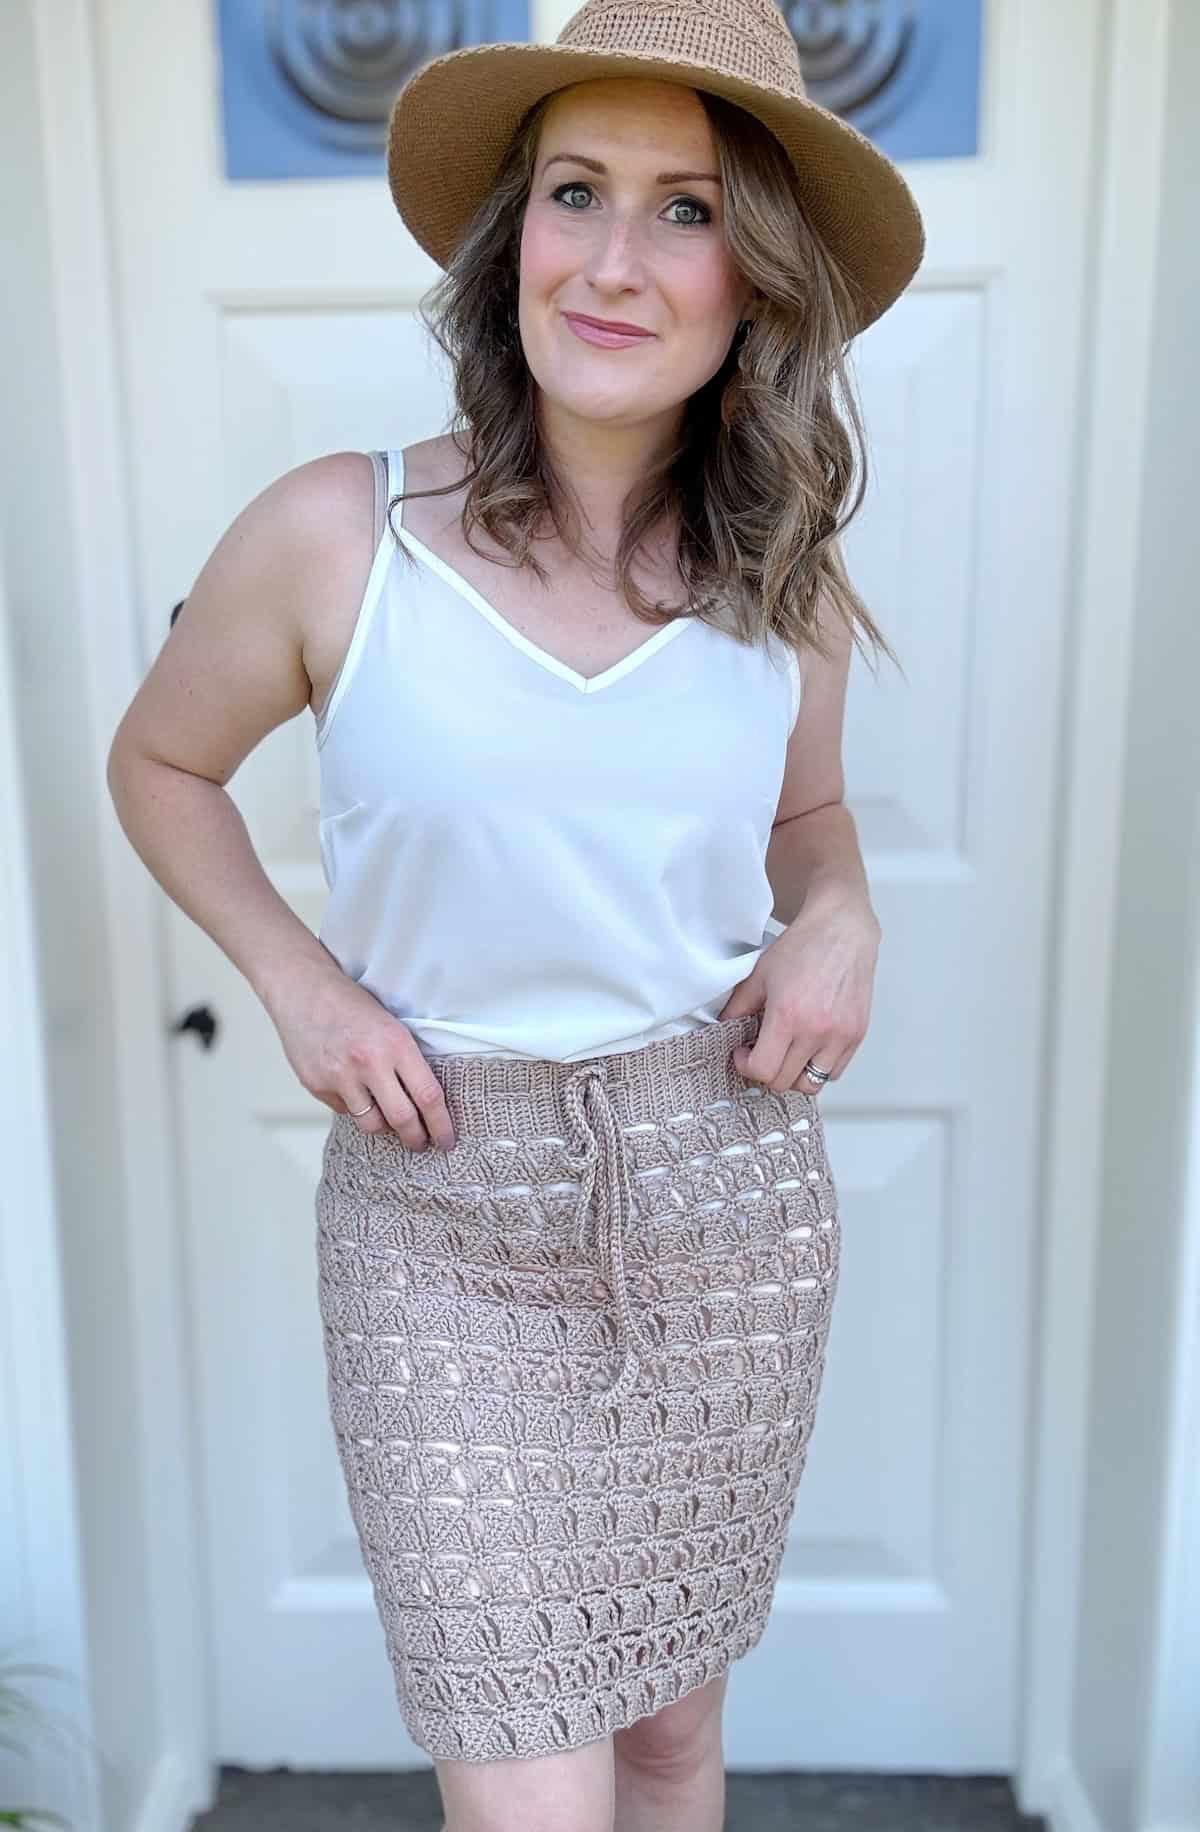 A woman stands in front of a white door wearing a white sleeveless top, a crochet skirt pattern in beige, and a woven broad-brim hat. She is smiling and has her hands on her hips.